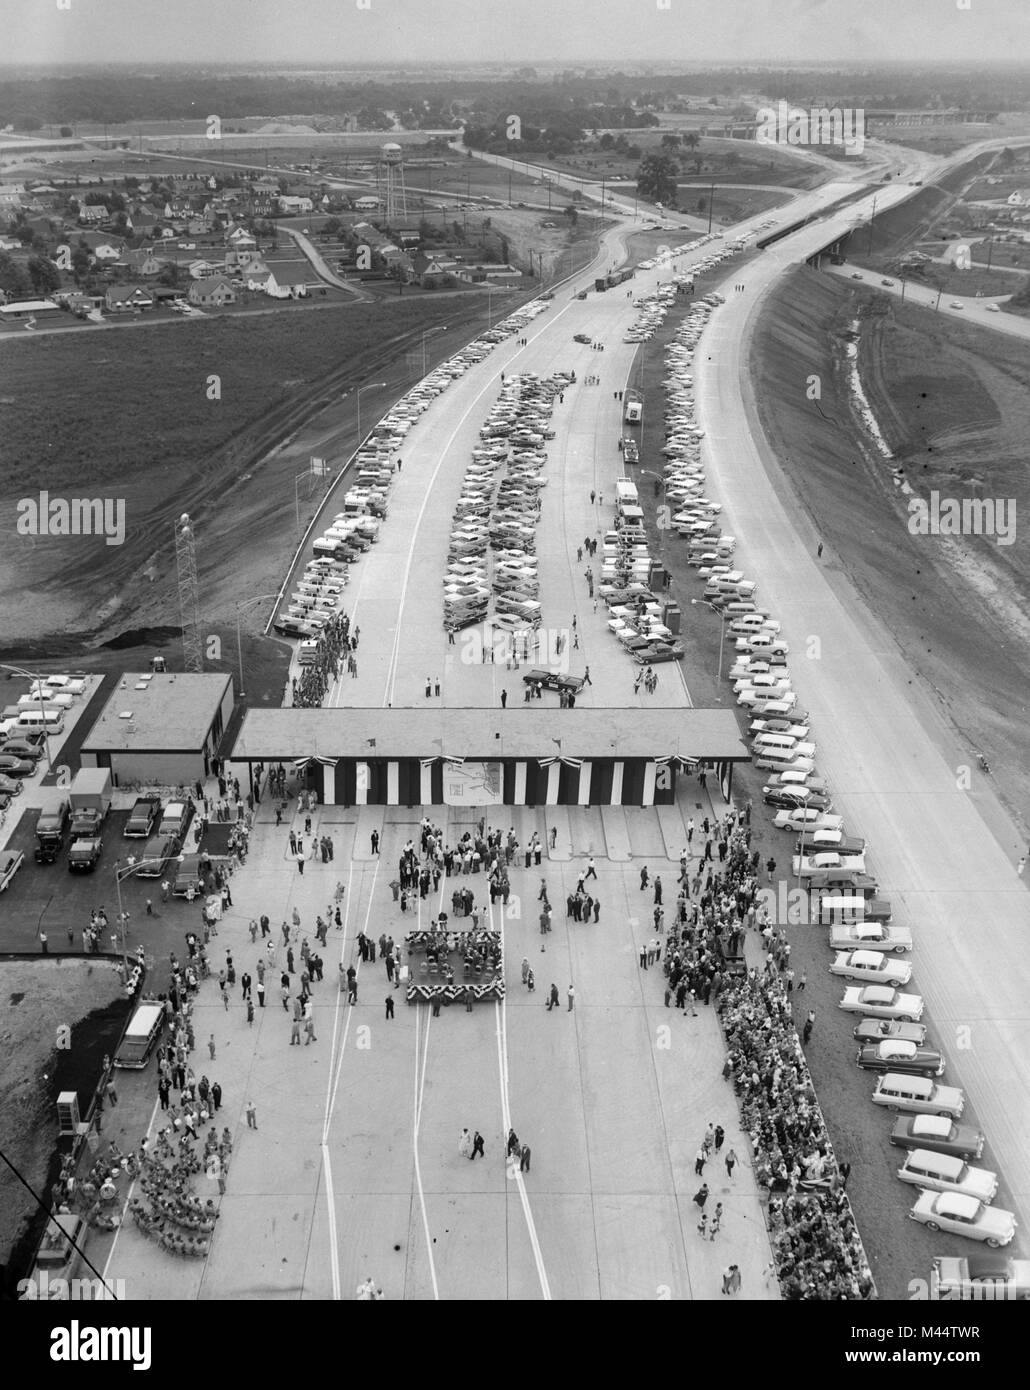 Dedication of Interstate Highway near the intersection of the Northwest Expressway and the Tri-State Expressway, ca. 1960 Stock Photo